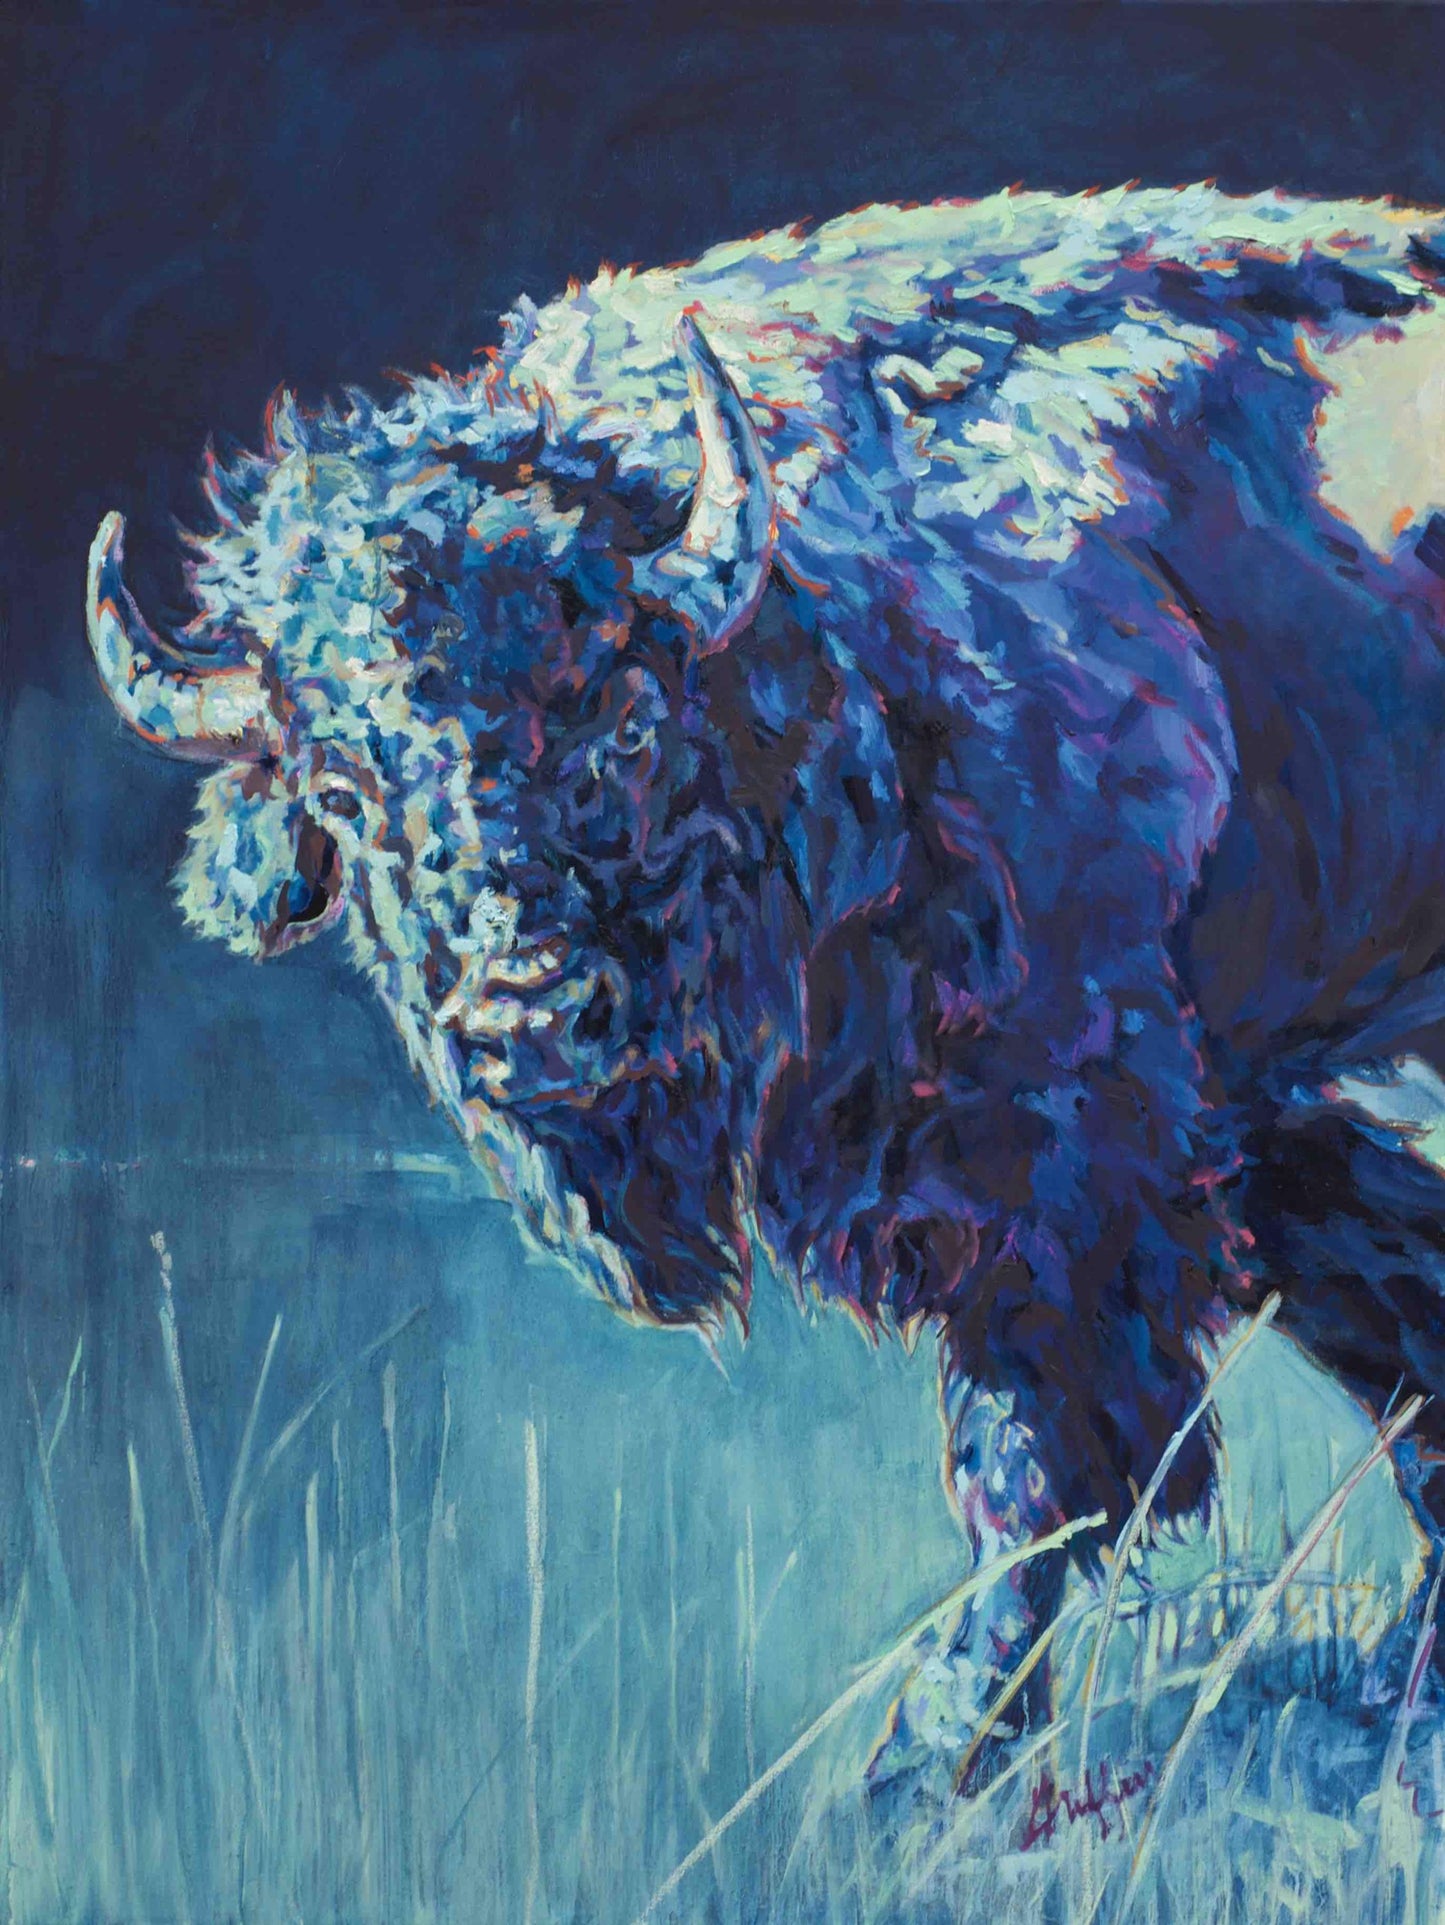 Original Oil Painting Of A Closeup Profile Of A Bison Walking Painted In A Blue Color Palette By Wildlife Painter Patricia Griffin 